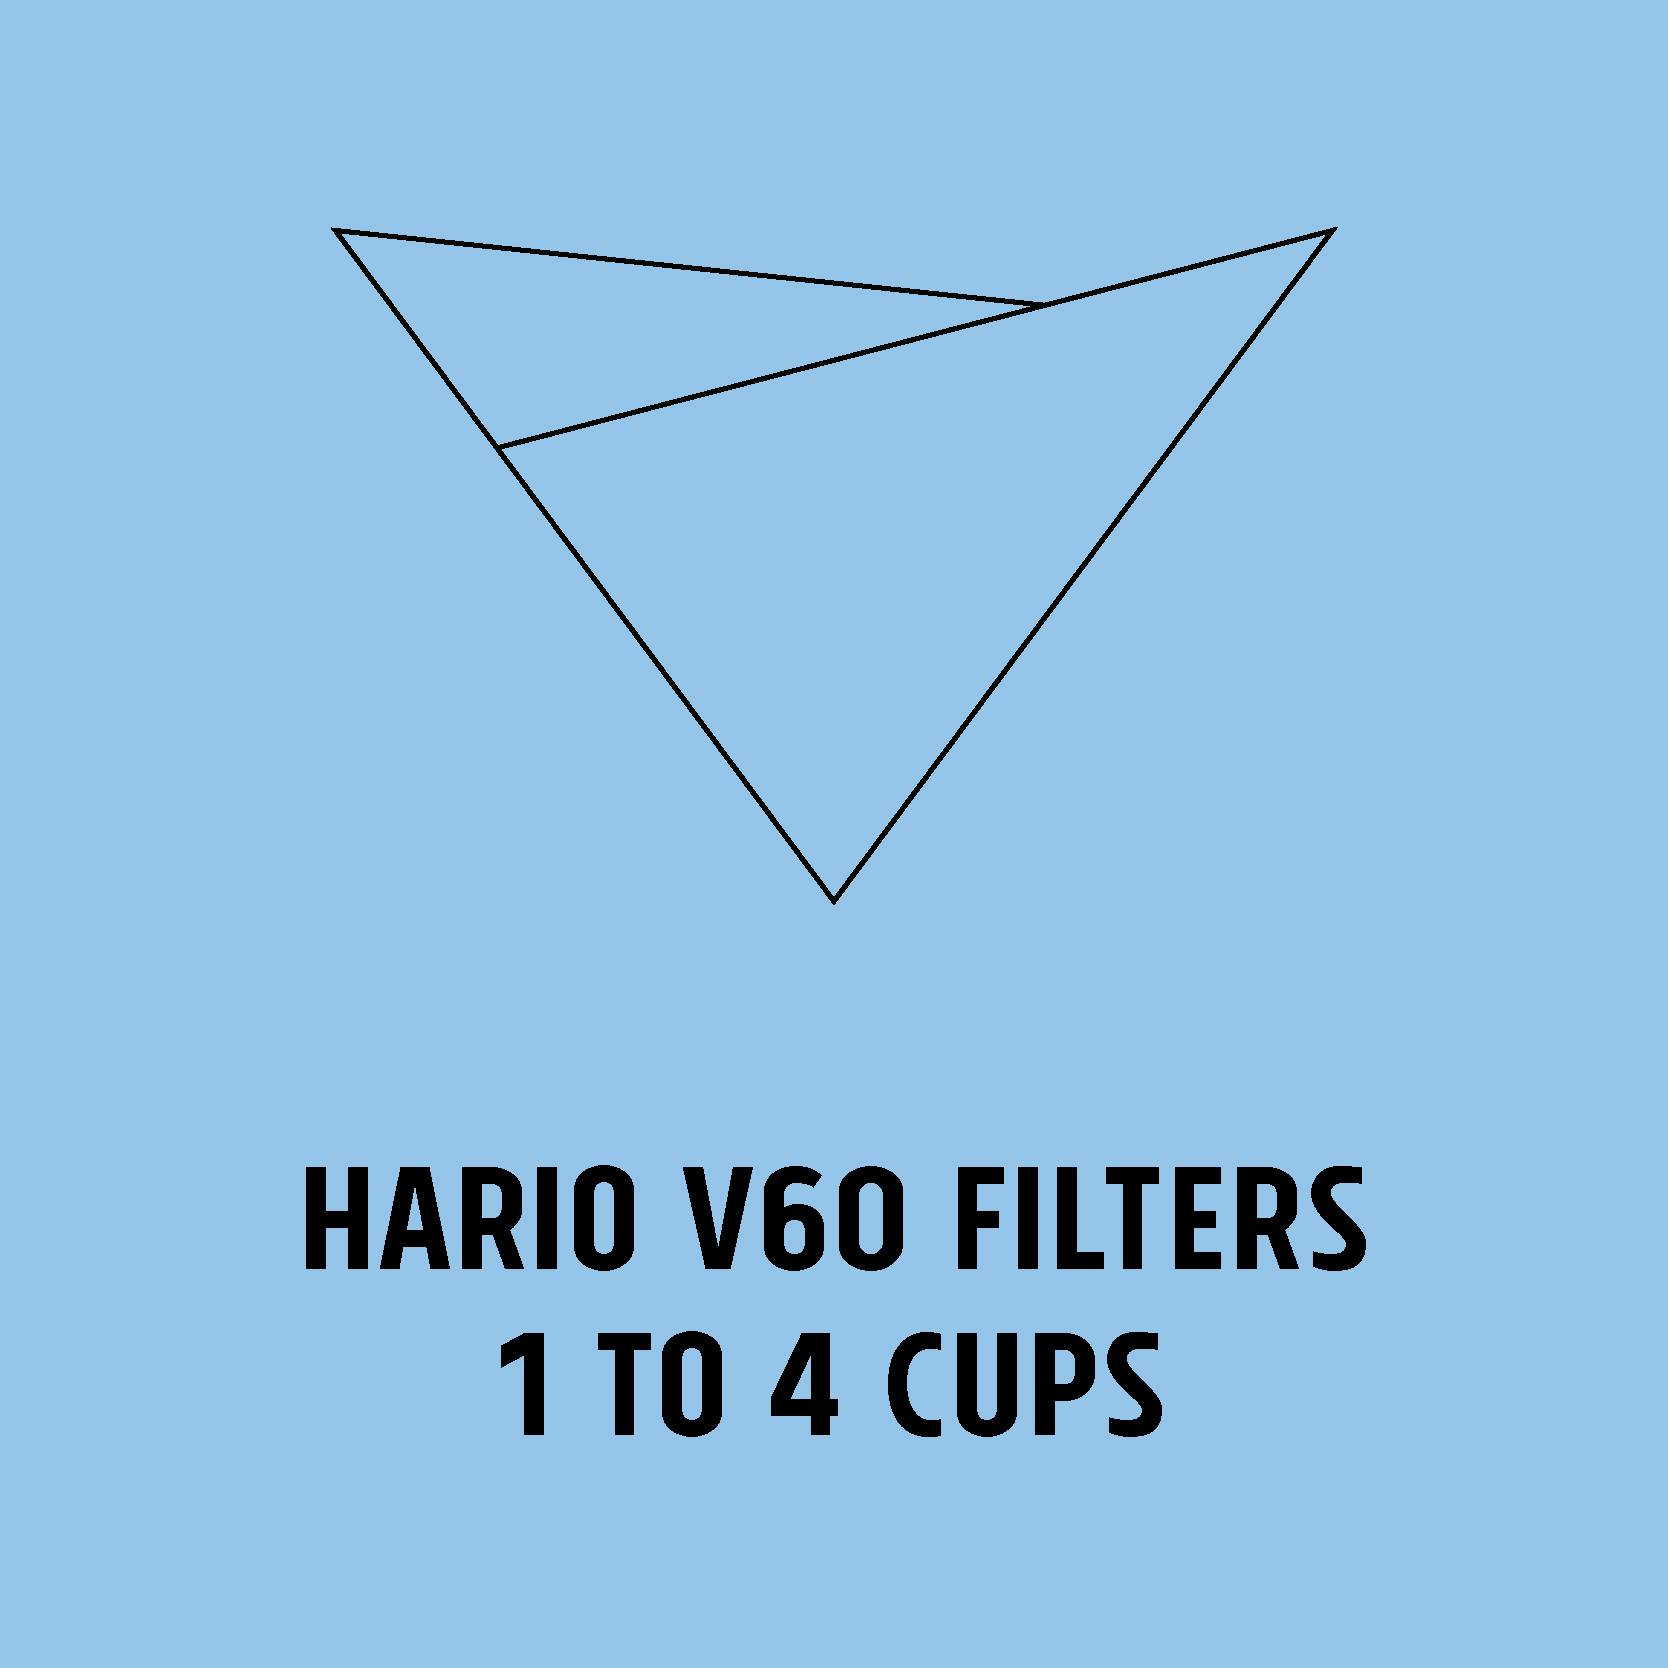 Hario V60 filters - 1 to 4 cups